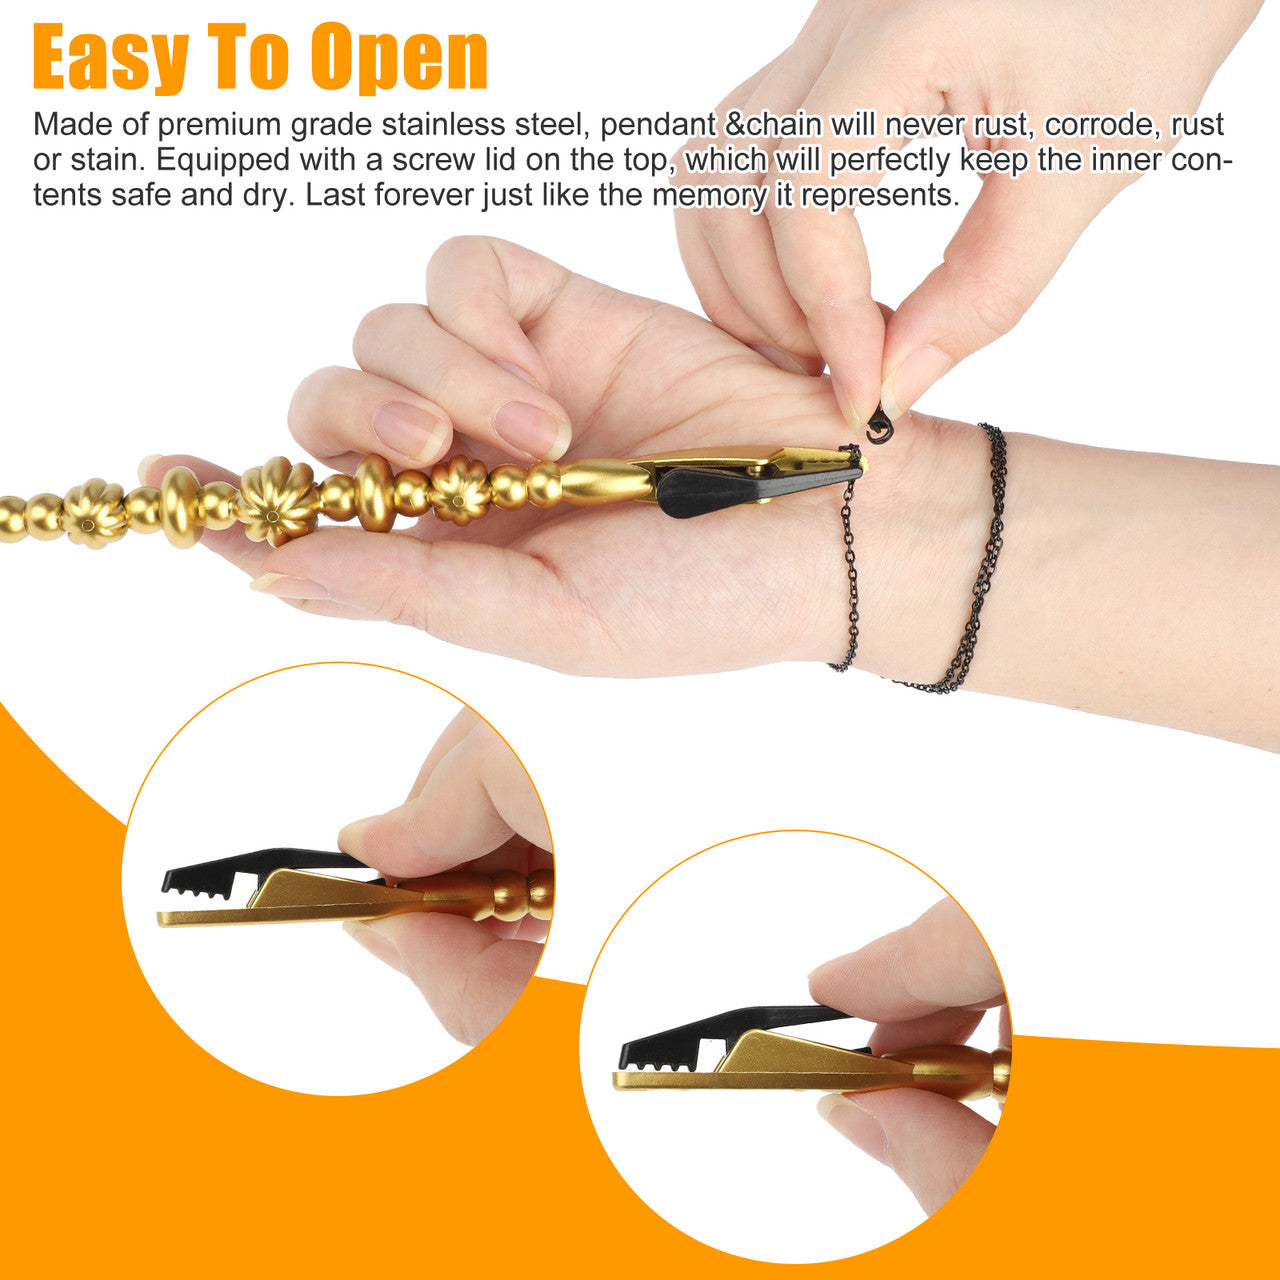 2 Pcs Hand Bracelet Wearing Helper Stick Tool - Long Clamp Fixed Hand Chain Aids with Bracelet Ties Watch Clasps Zippers (Gold+Silver)